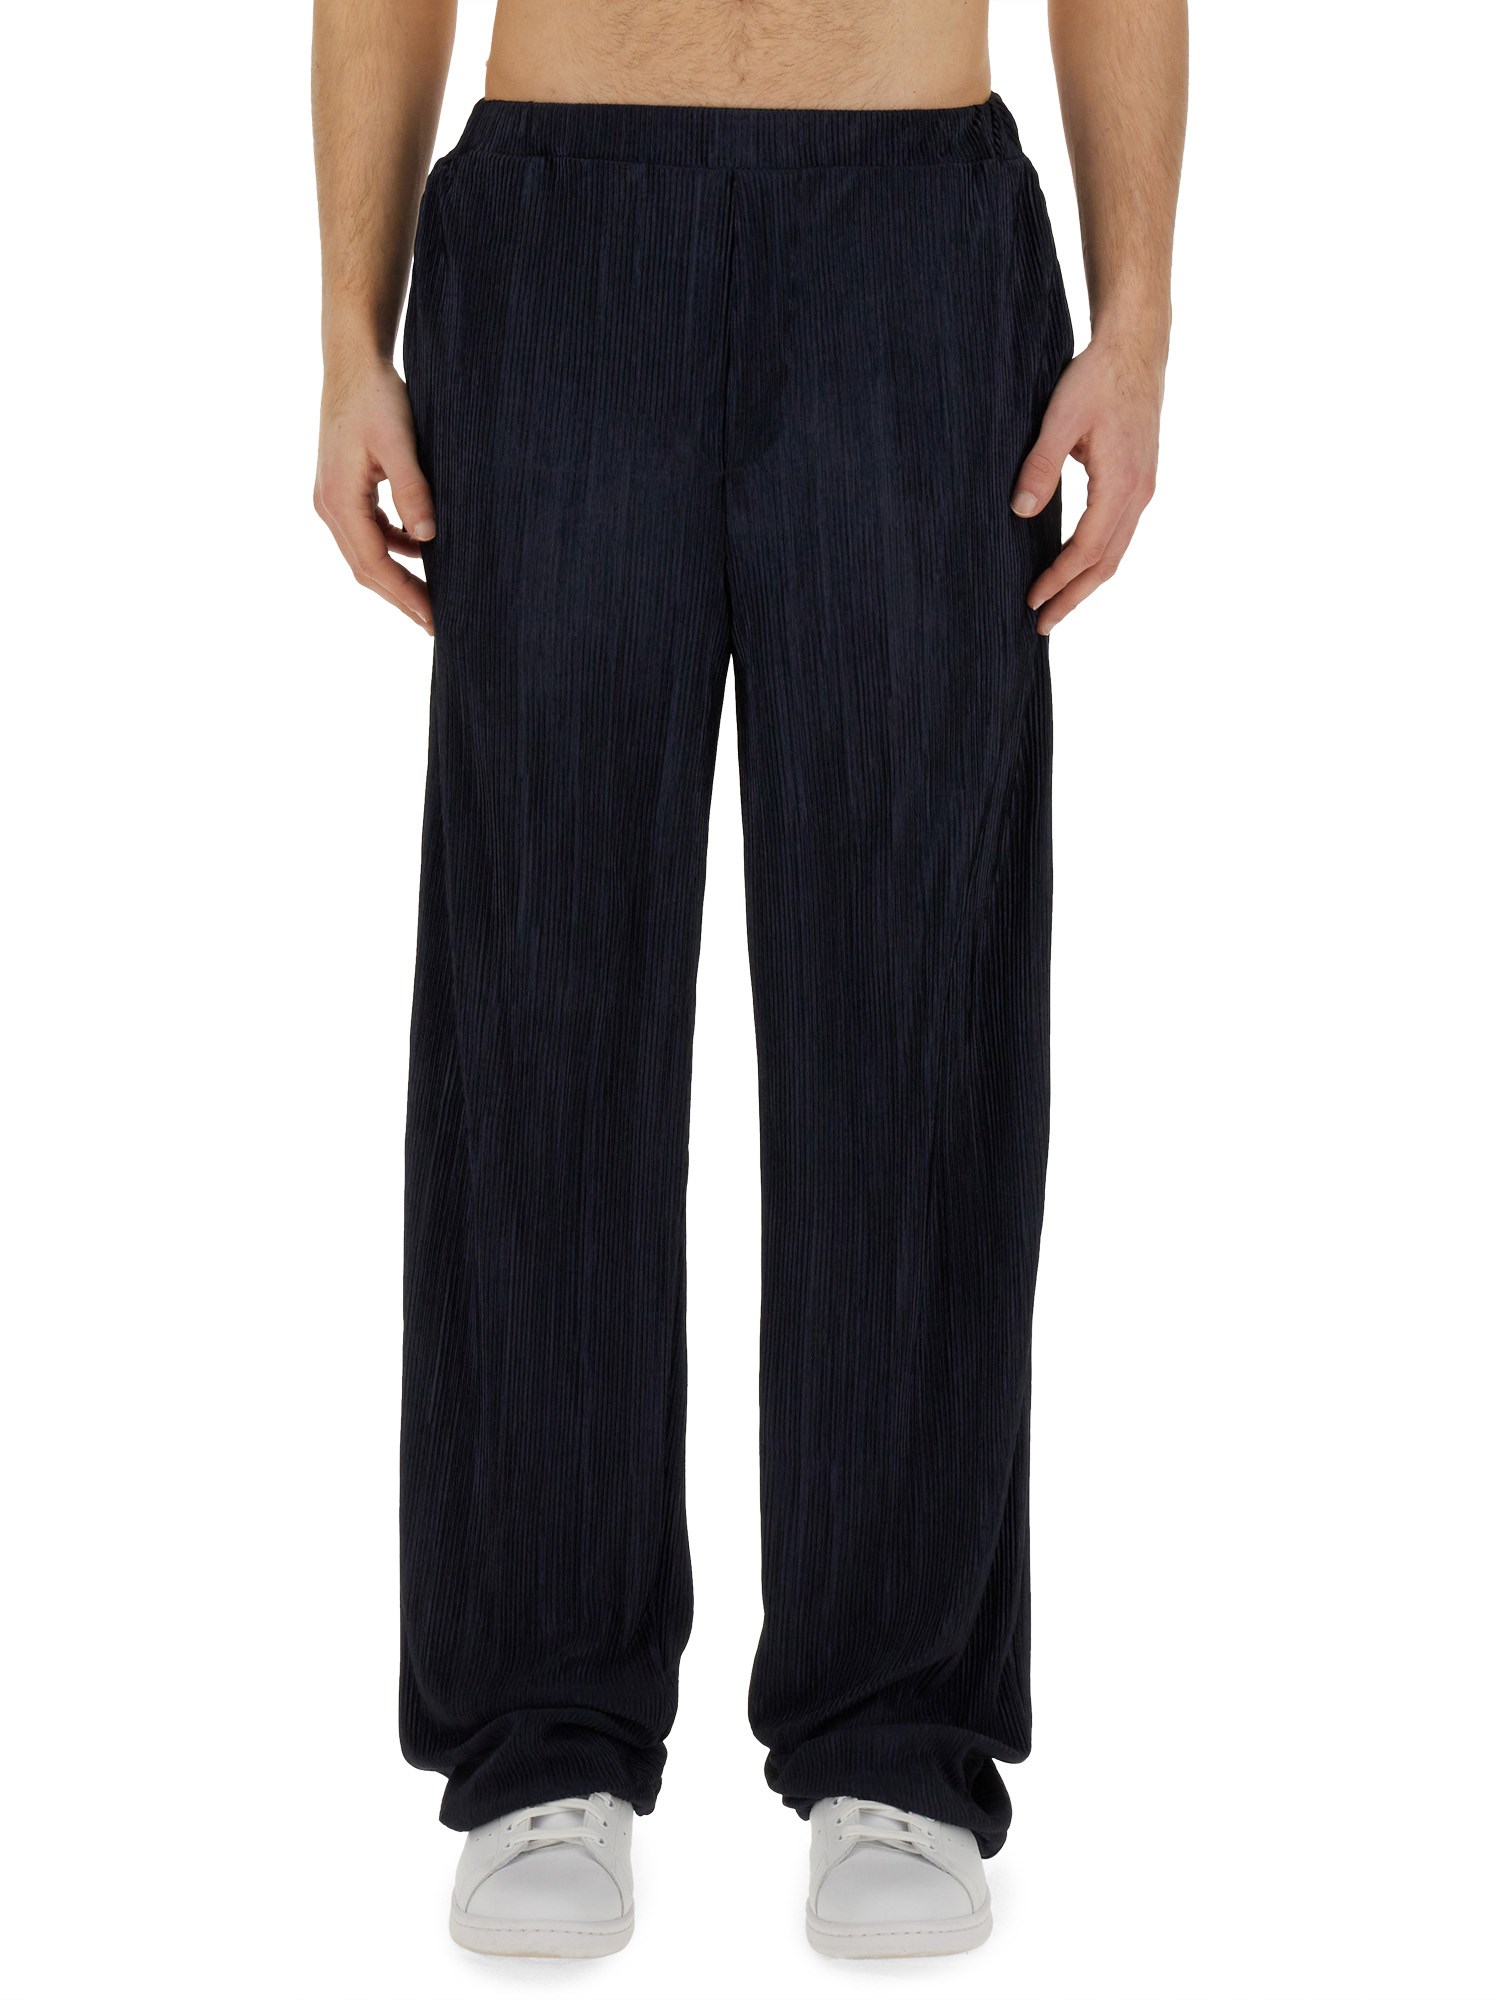 Family First family first pleated pants